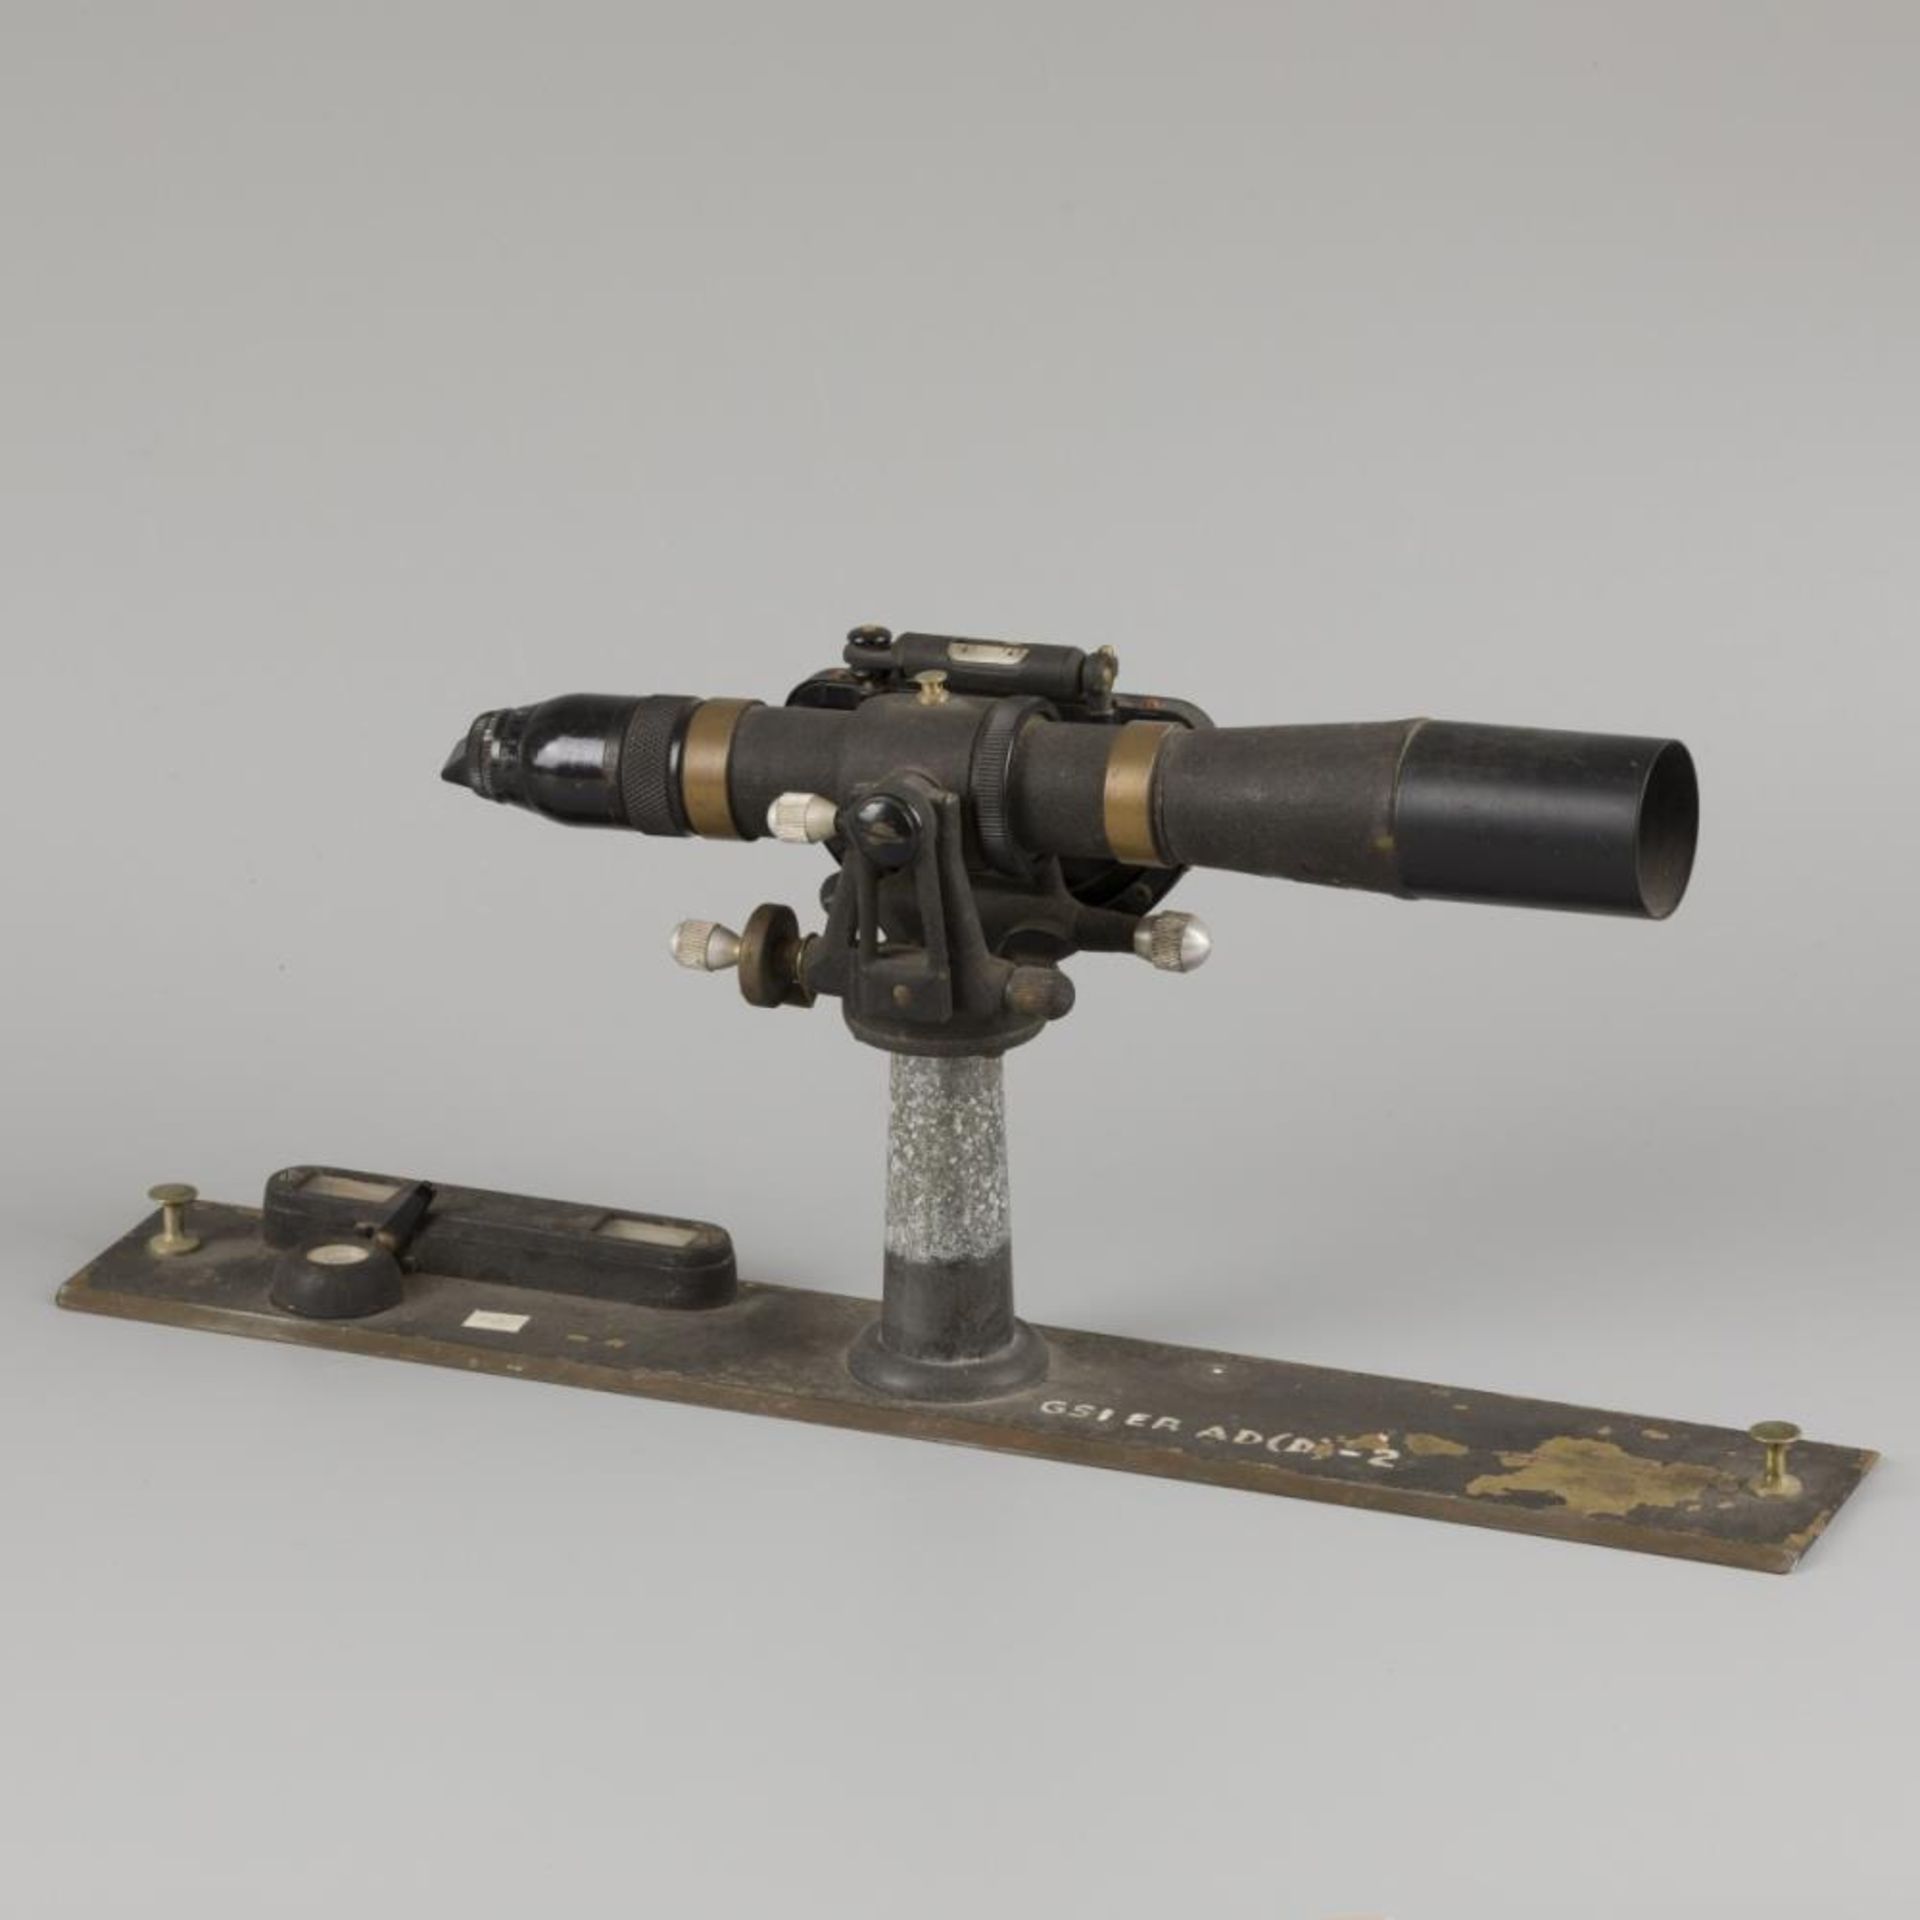 A geological alidade, distance meter, Dietzgen U.S.A., United States, 1st half 20th century.